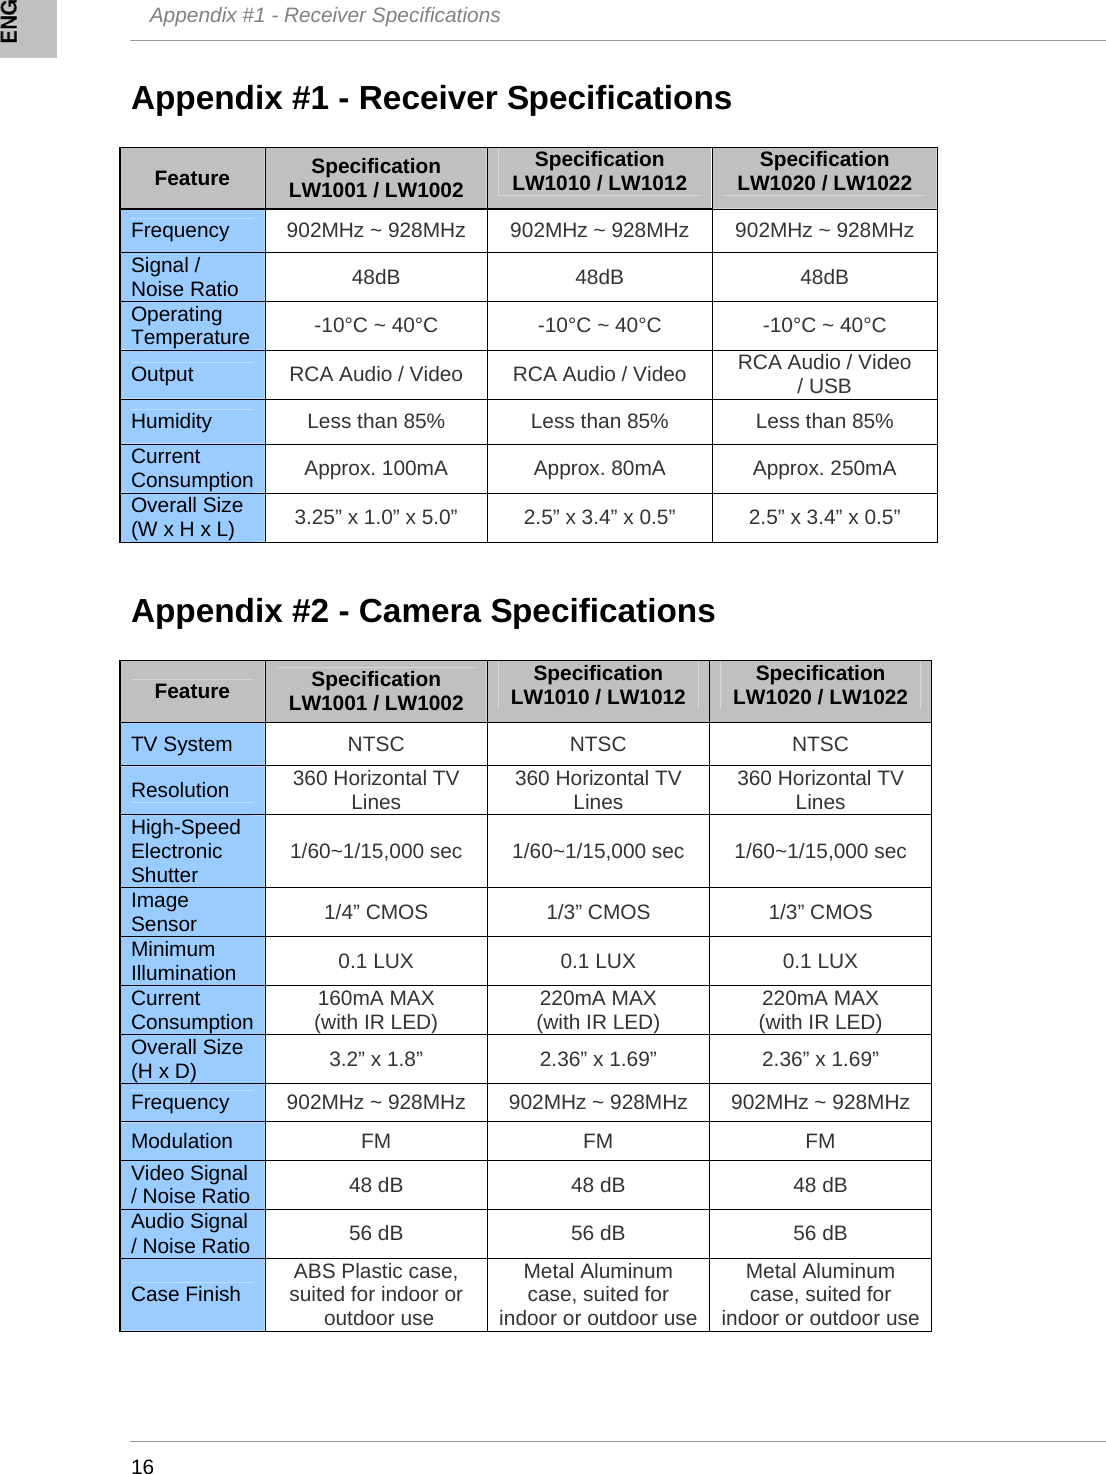   Appendix #1 - Receiver Specifications    16 Appendix #1 - Receiver Specifications  Feature  Specification LW1001 / LW1002 Specification LW1010 / LW1012  Specification LW1020 / LW1022 Frequency  902MHz ~ 928MHz  902MHz ~ 928MHz  902MHz ~ 928MHz Signal / Noise Ratio  48dB  48dB  48dB Operating Temperature  -10°C ~ 40°C  -10°C ~ 40°C  -10°C ~ 40°C Output  RCA Audio / Video  RCA Audio / Video  RCA Audio / Video  / USB Humidity  Less than 85%  Less than 85%  Less than 85% Current Consumption  Approx. 100mA  Approx. 80mA  Approx. 250mA Overall Size (W x H x L)  3.25” x 1.0” x 5.0”   2.5” x 3.4” x 0.5”   2.5” x 3.4” x 0.5”   Appendix #2 - Camera Specifications  Feature  Specification LW1001 / LW1002 Specification LW1010 / LW1012  Specification LW1020 / LW1022 TV System  NTSC  NTSC  NTSC Resolution  360 Horizontal TV Lines  360 Horizontal TV Lines  360 Horizontal TV Lines High-Speed Electronic Shutter  1/60~1/15,000 sec  1/60~1/15,000 sec  1/60~1/15,000 sec Image Sensor  1/4” CMOS  1/3” CMOS  1/3” CMOS Minimum Illumination  0.1 LUX  0.1 LUX  0.1 LUX Current Consumption  160mA MAX  (with IR LED)  220mA MAX  (with IR LED)  220mA MAX  (with IR LED) Overall Size (H x D)  3.2” x 1.8”  2.36” x 1.69”  2.36” x 1.69” Frequency  902MHz ~ 928MHz  902MHz ~ 928MHz  902MHz ~ 928MHz Modulation  FM  FM  FM Video Signal / Noise Ratio  48 dB  48 dB  48 dB Audio Signal / Noise Ratio  56 dB  56 dB  56 dB Case Finish  ABS Plastic case, suited for indoor or  outdoor use Metal Aluminum case, suited for indoor or outdoor use Metal Aluminum case, suited for indoor or outdoor use   